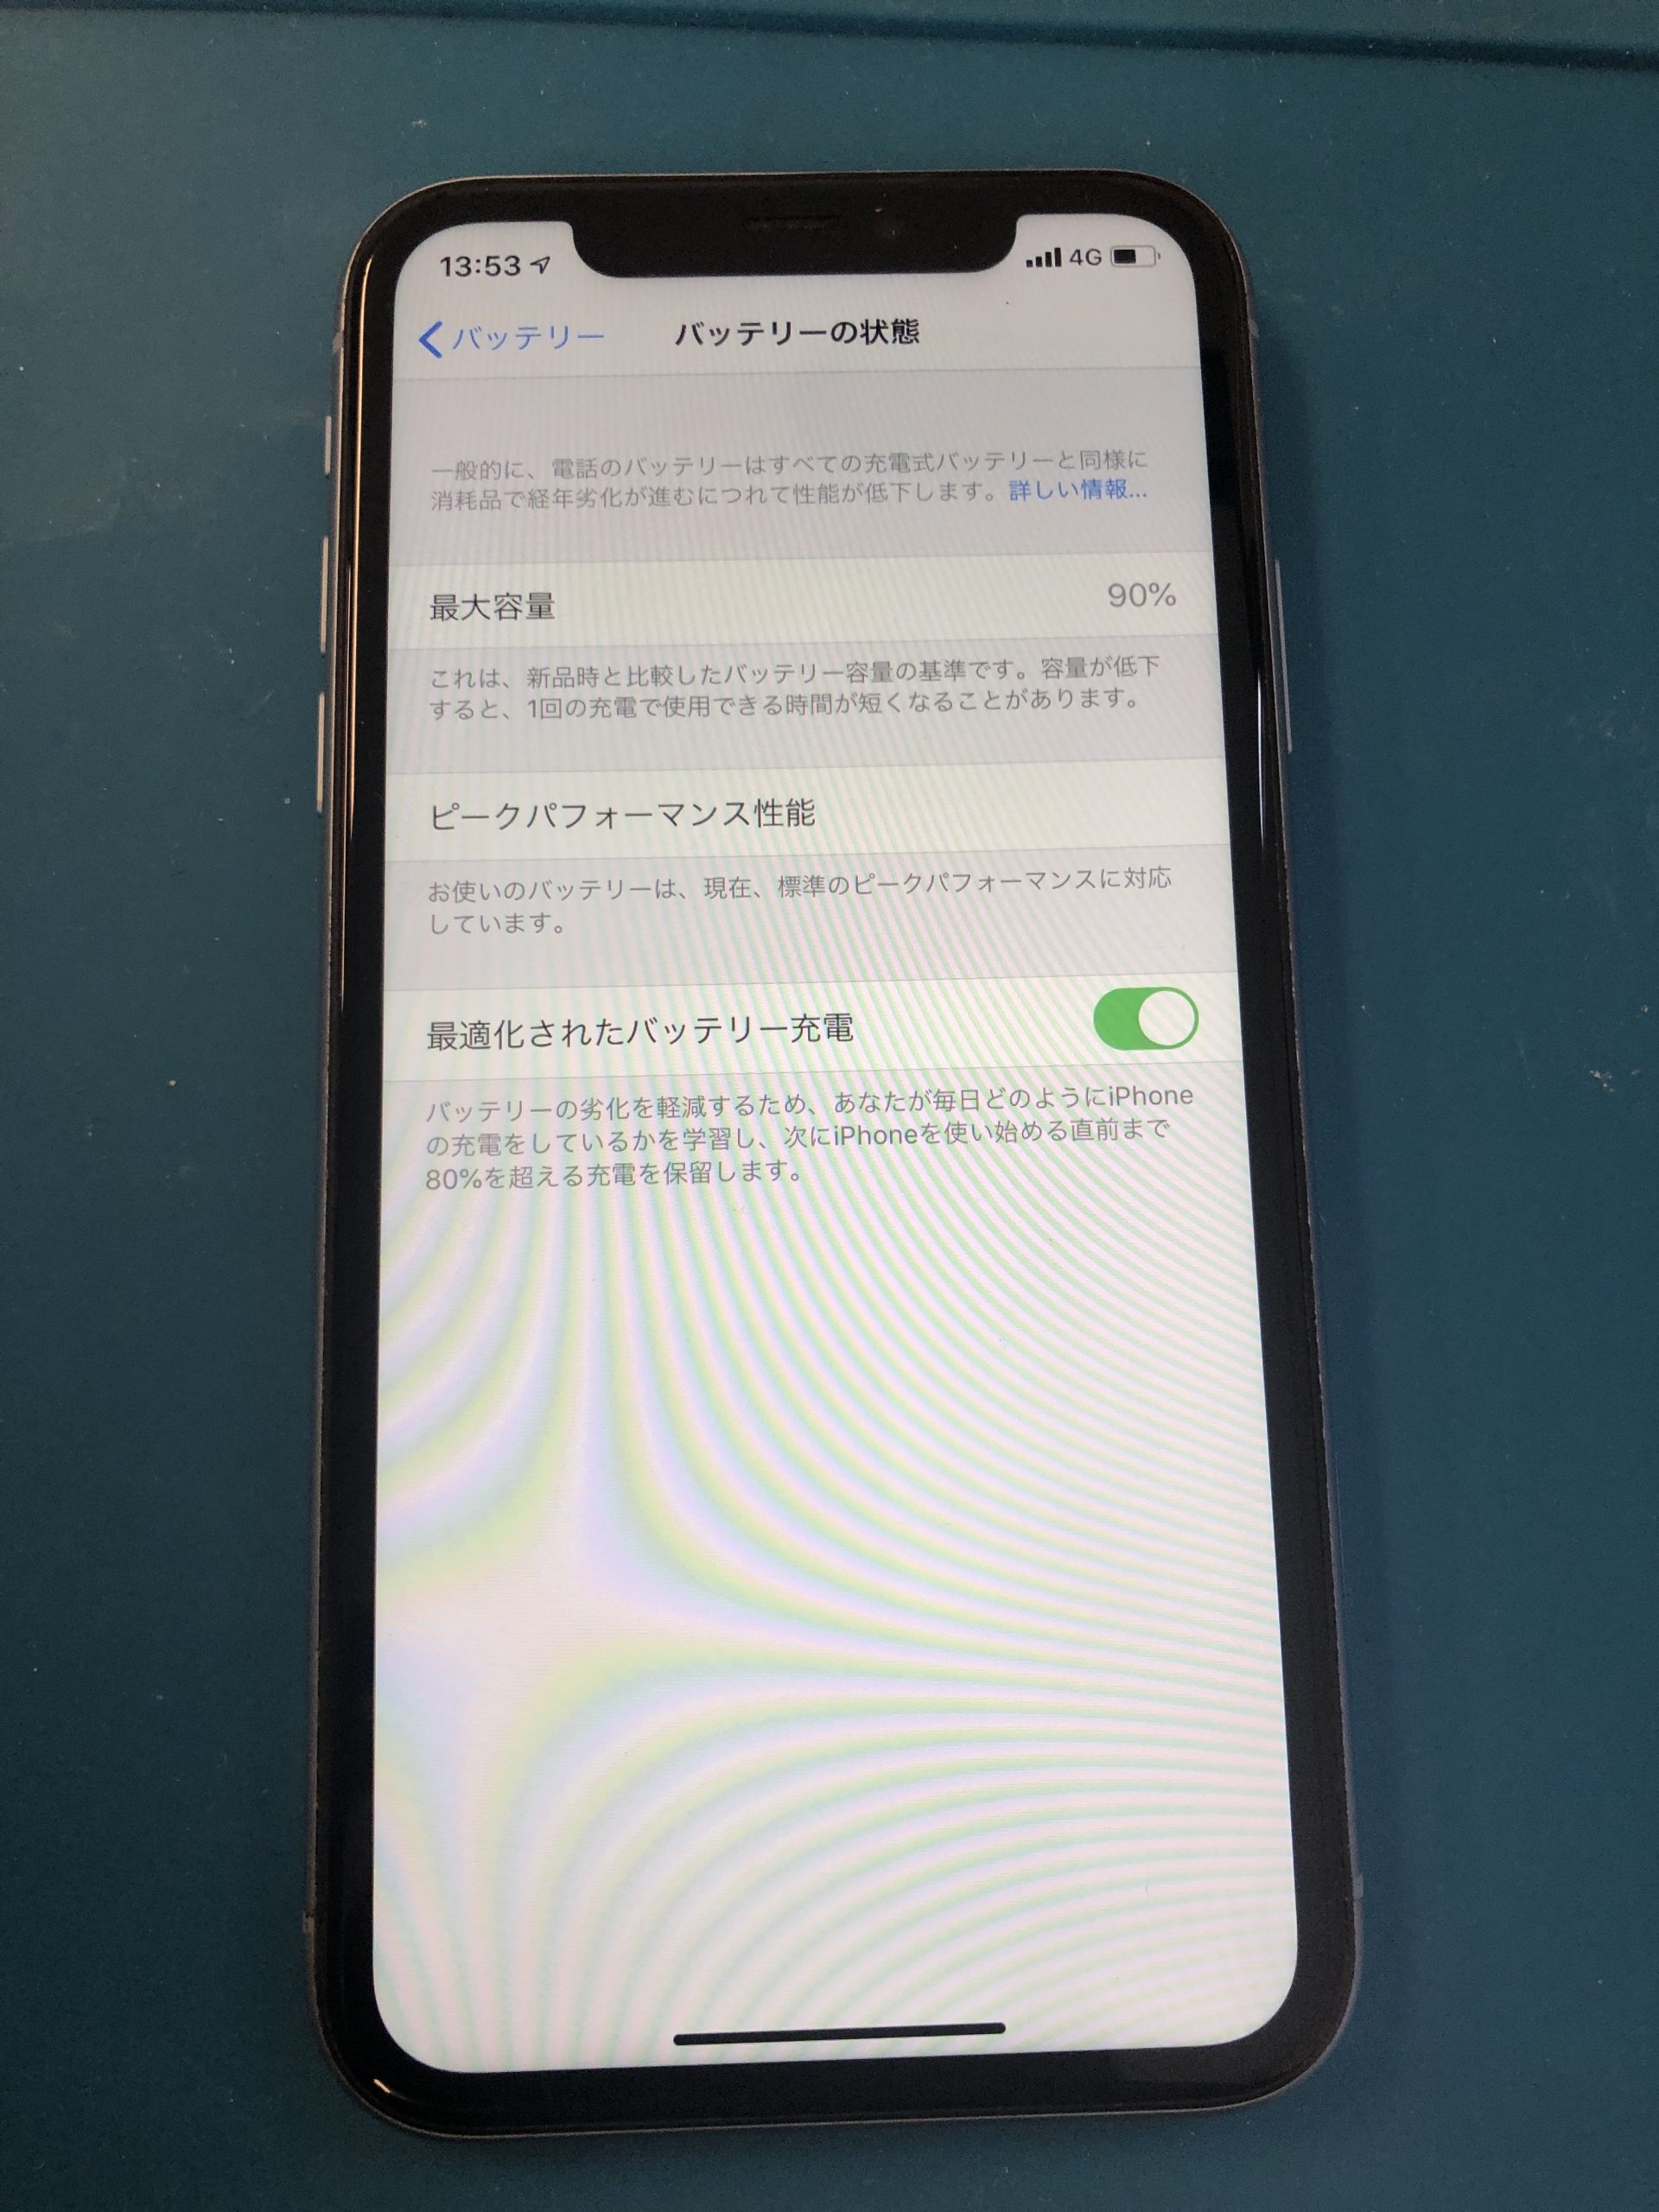 iPhone XR 64gb ほぼ新品！！　バッテリー容量100%